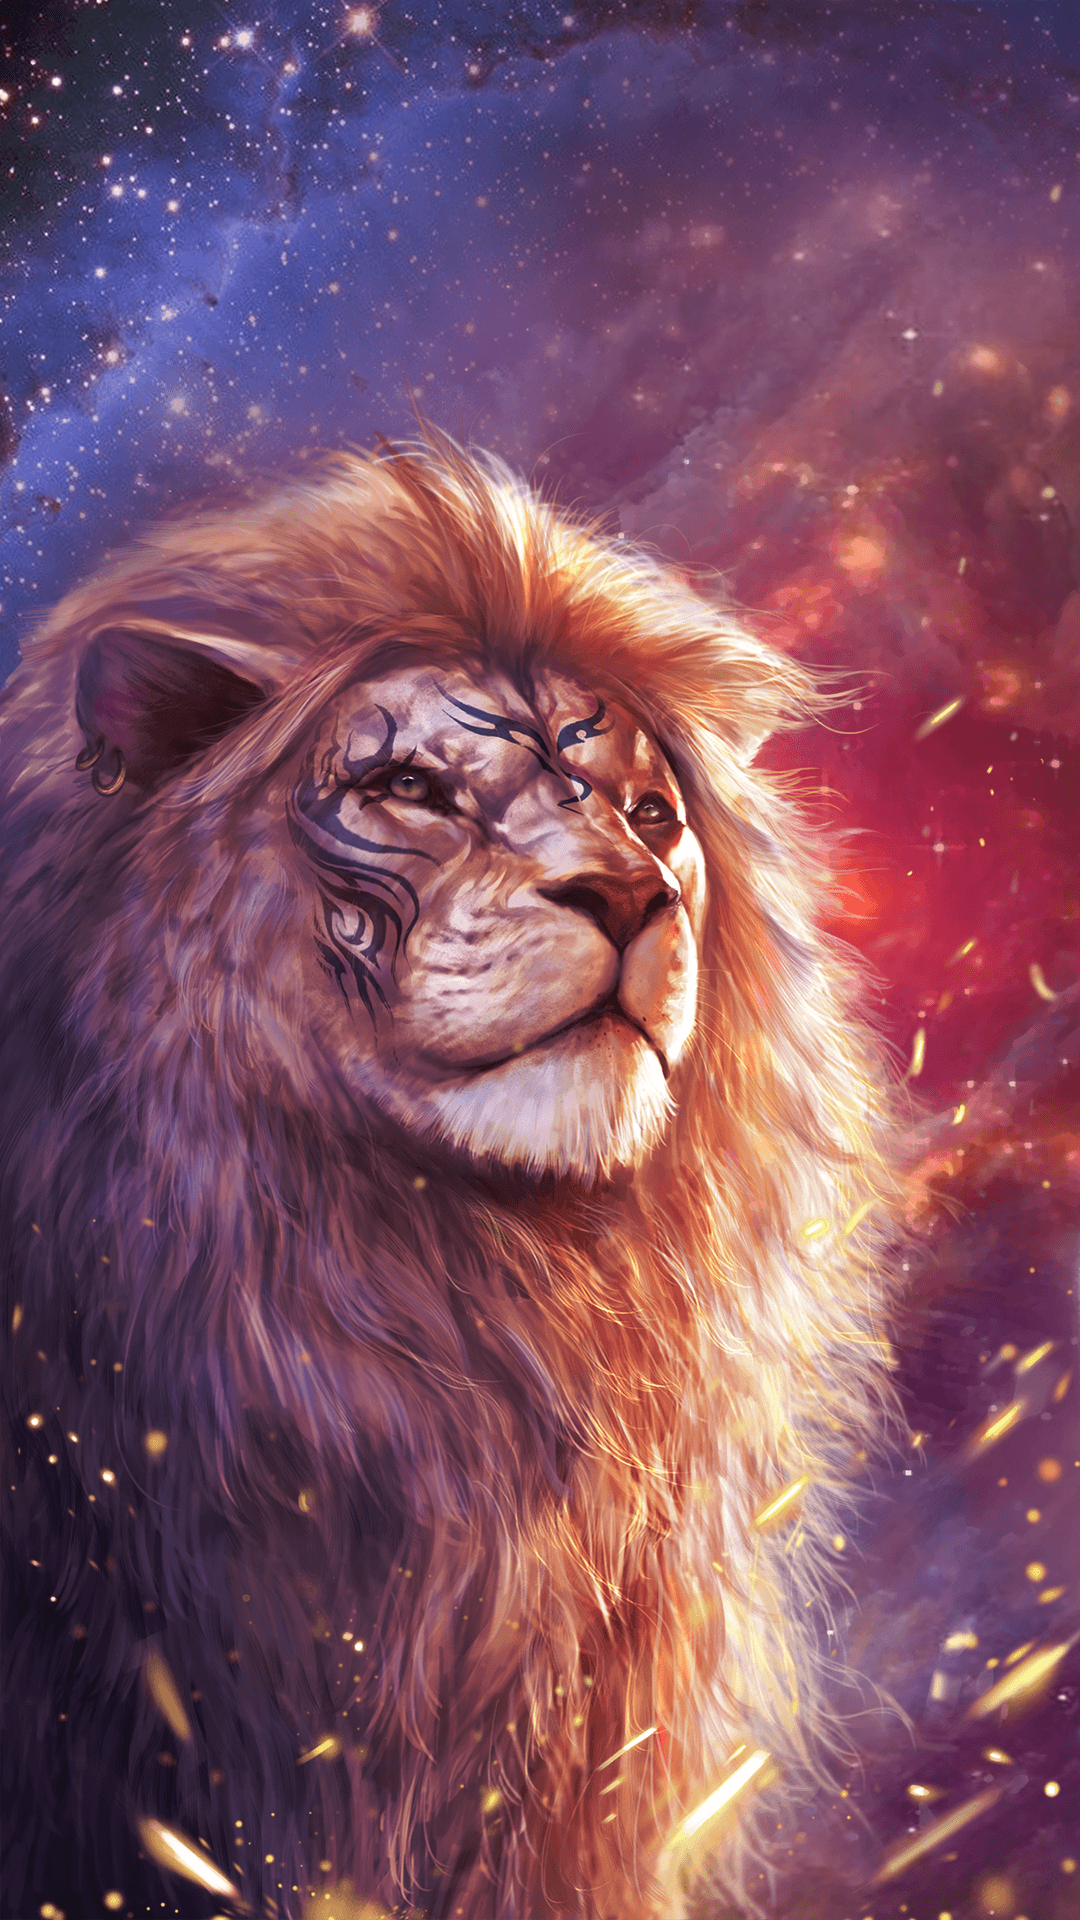 Download Lions wallpapers for mobile phone free Lions HD pictures